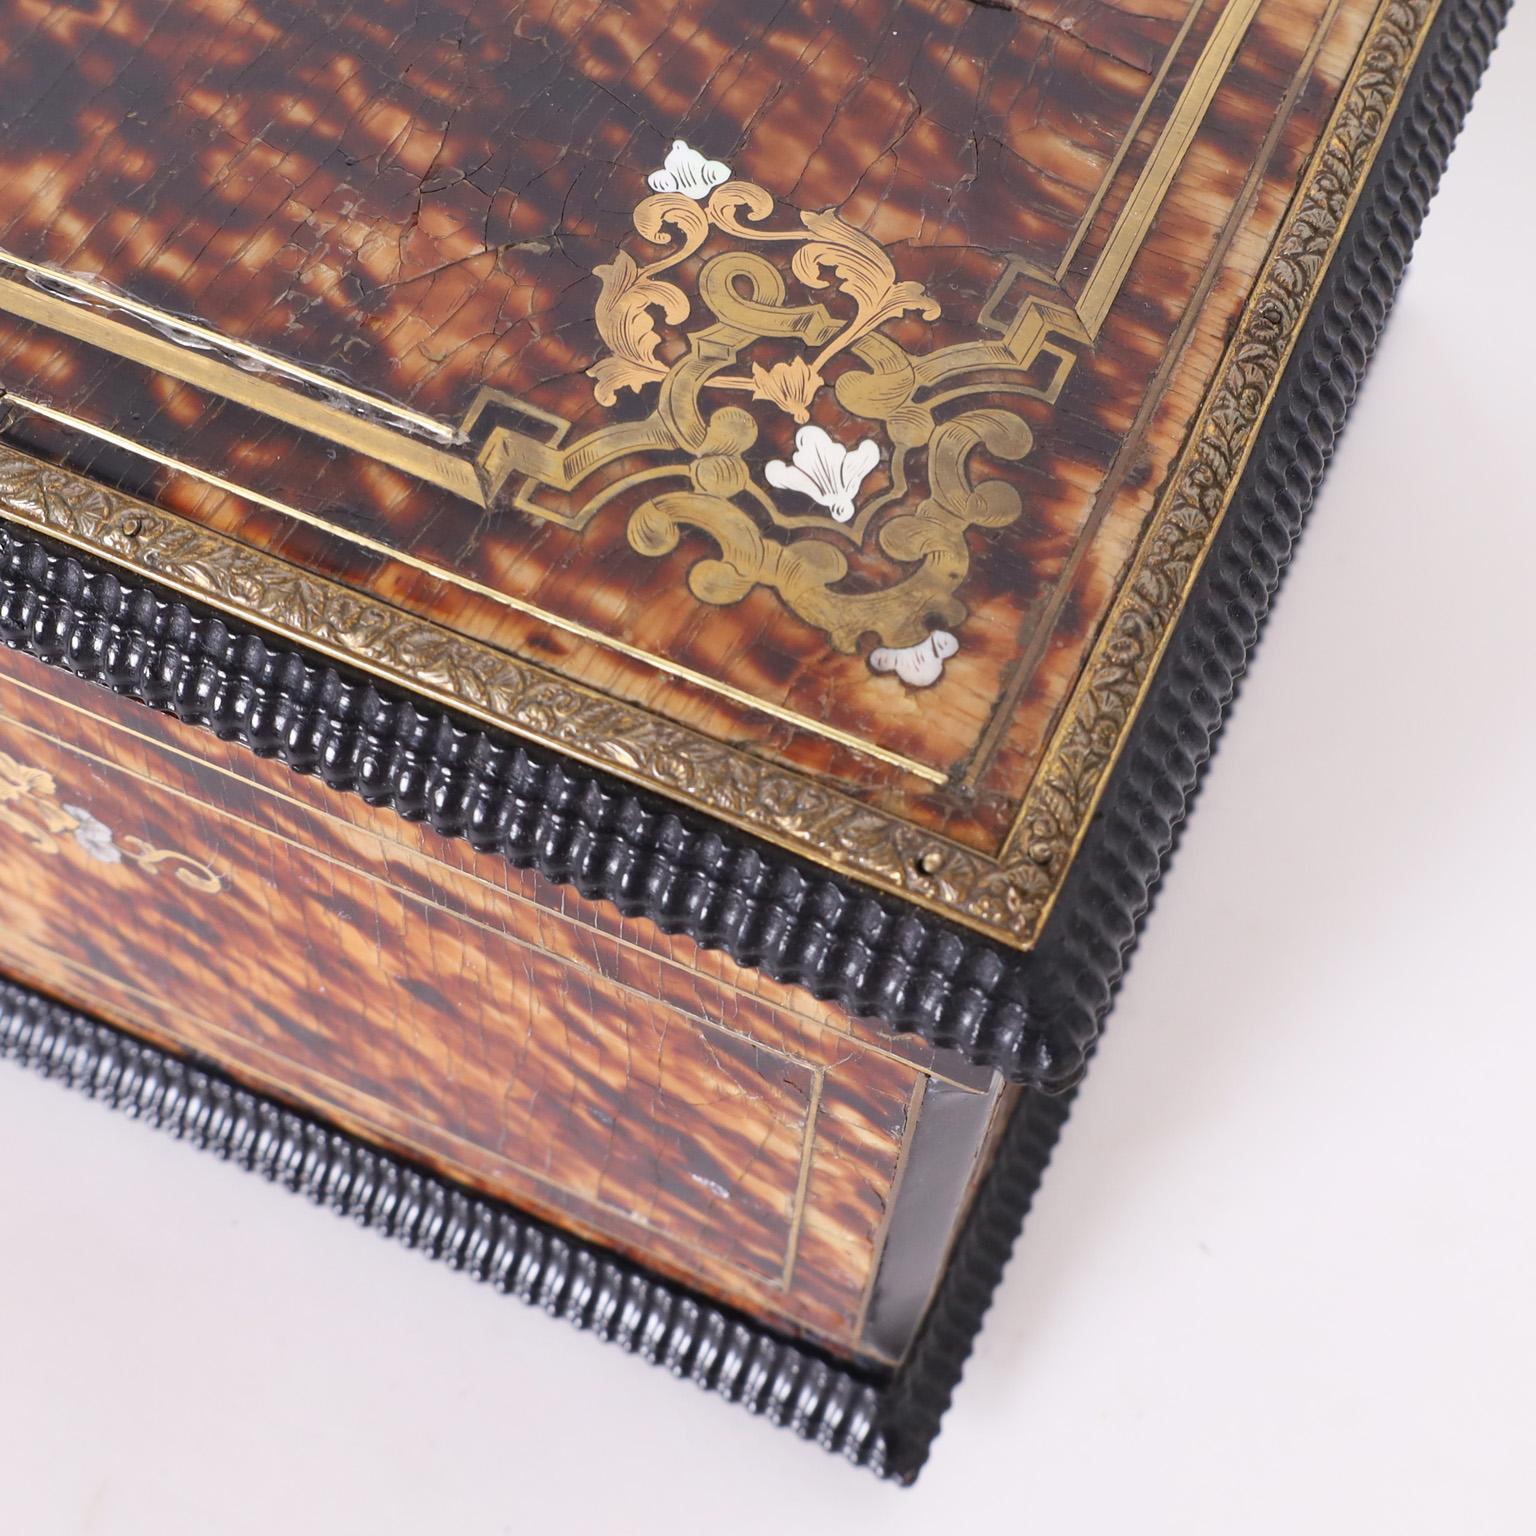 Hand-Crafted French Tortoise Jewelry or Dresser Box